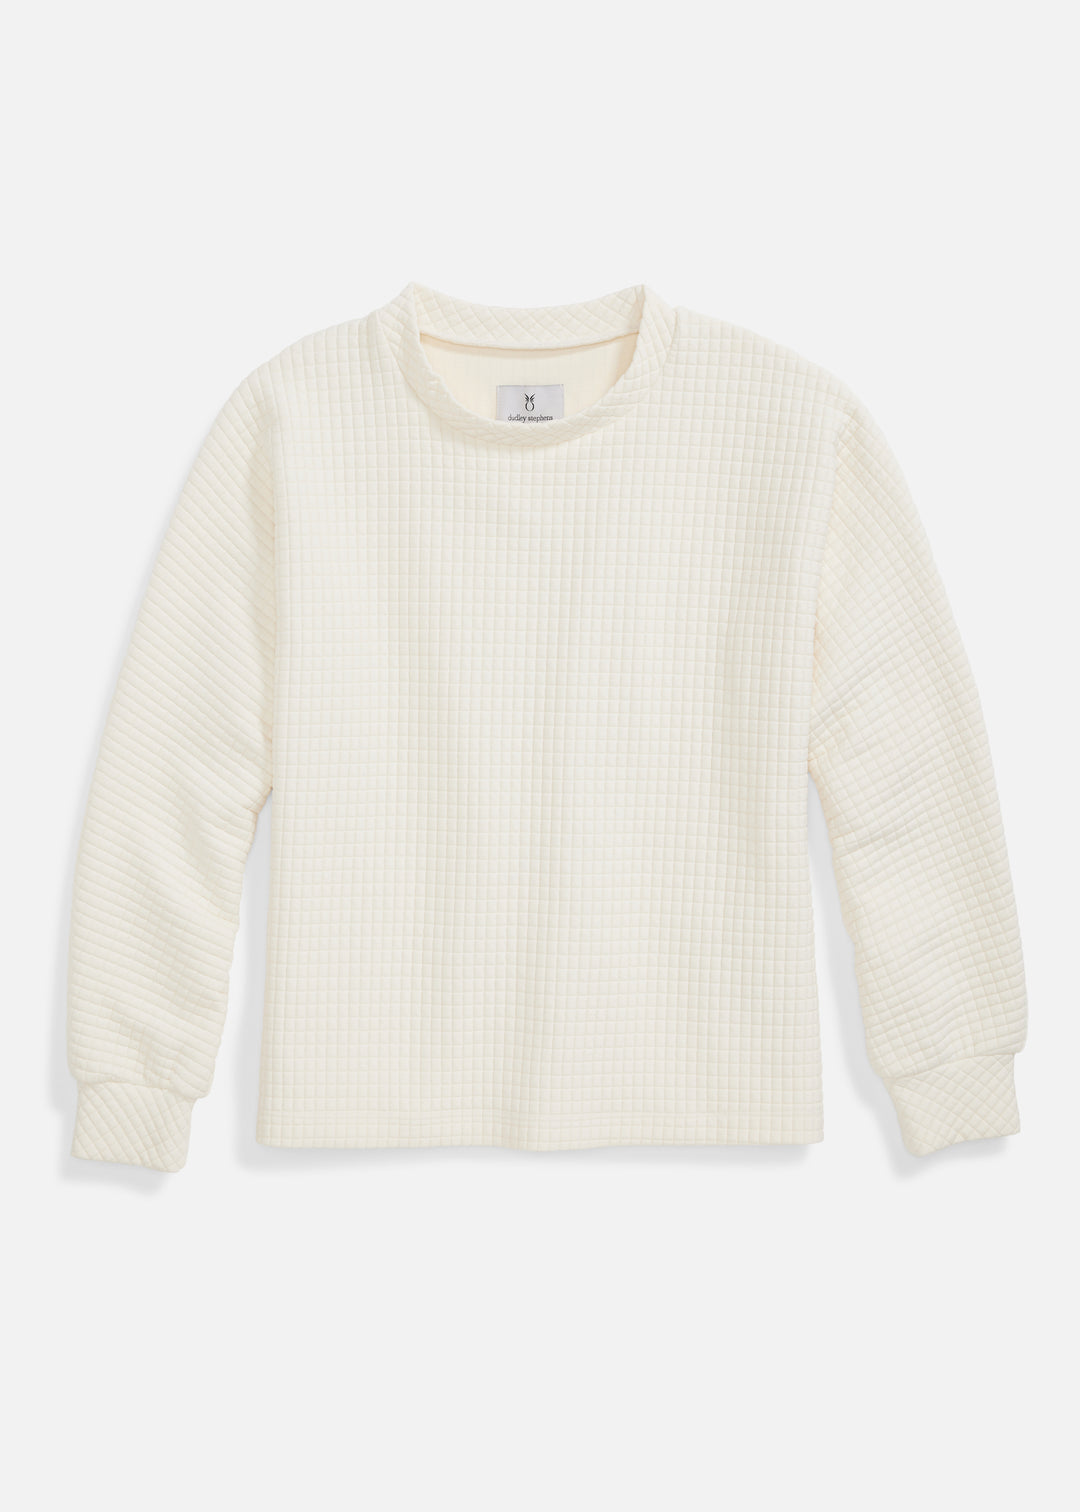 P'town Pullover in Waffle (Cream)